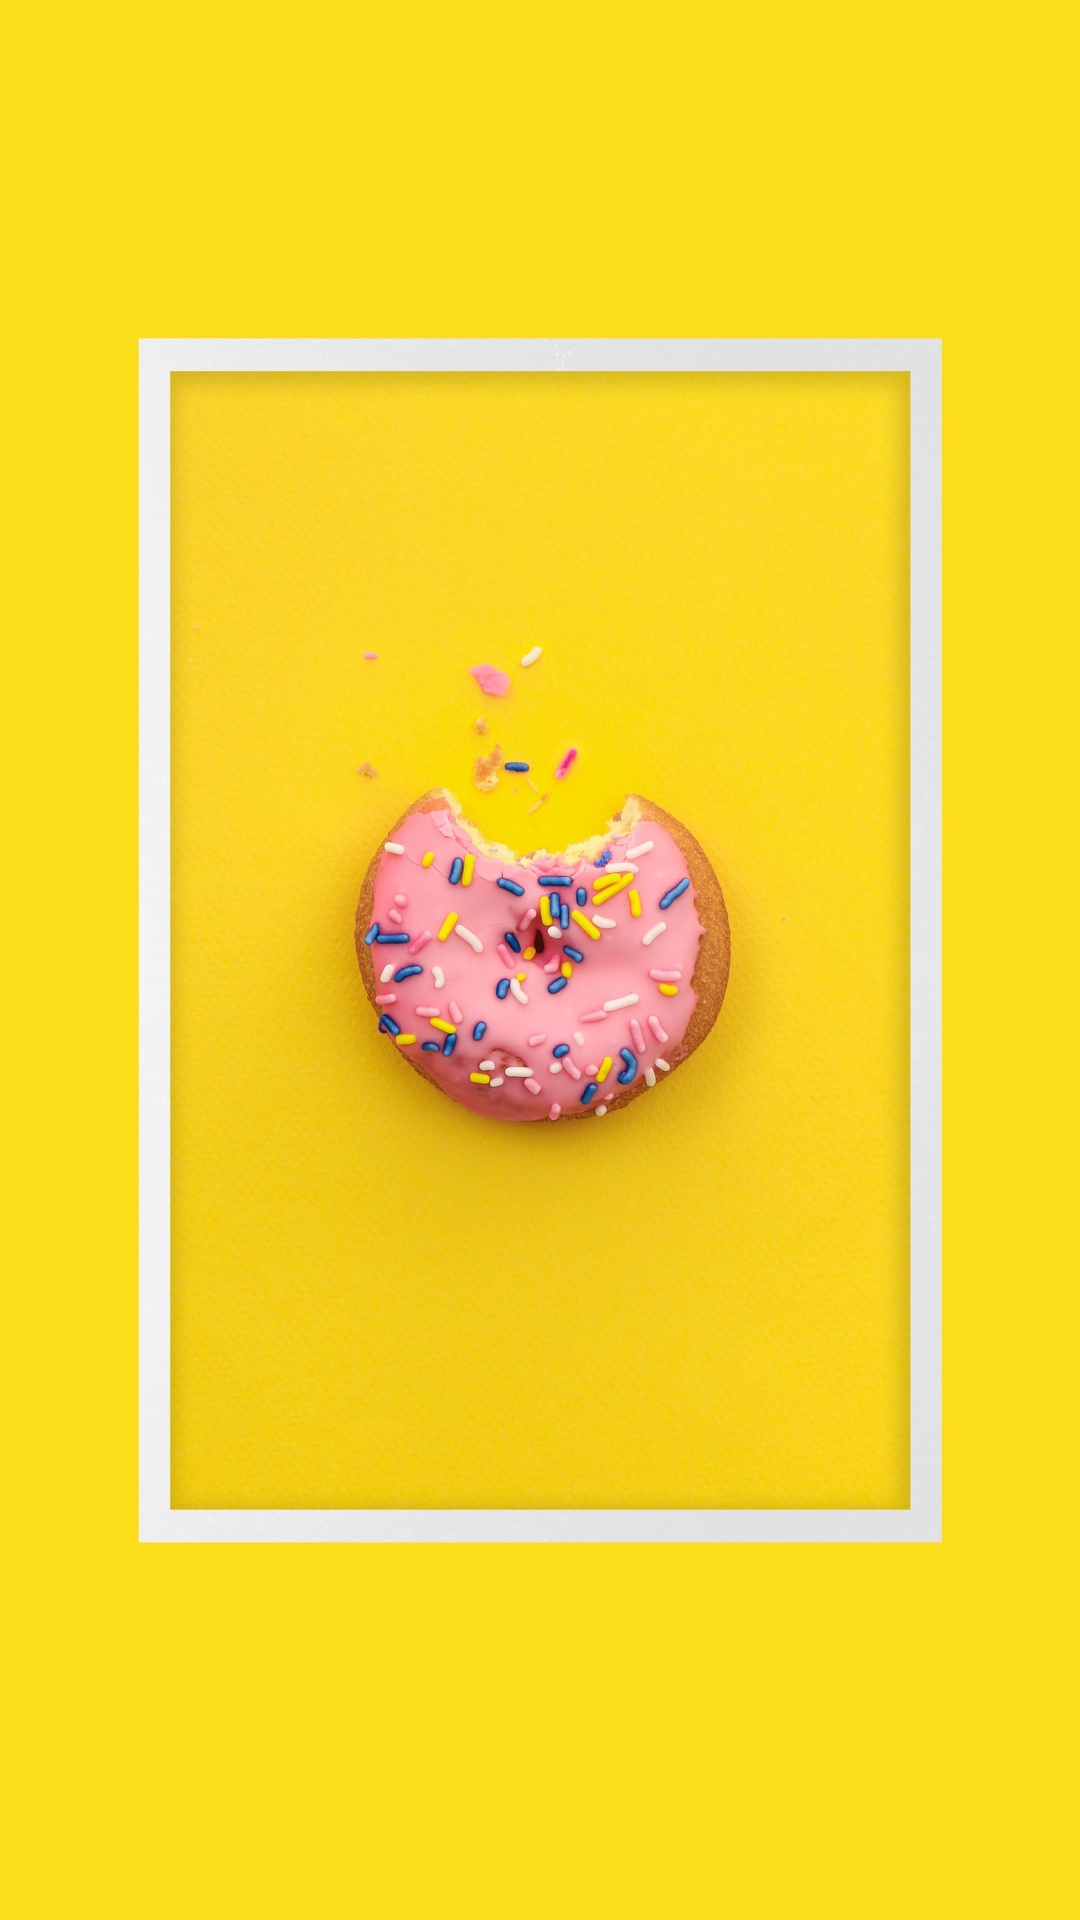 Yellow and White Heart Shaped Cookie. Wallpaper in 1080x1920 Resolution